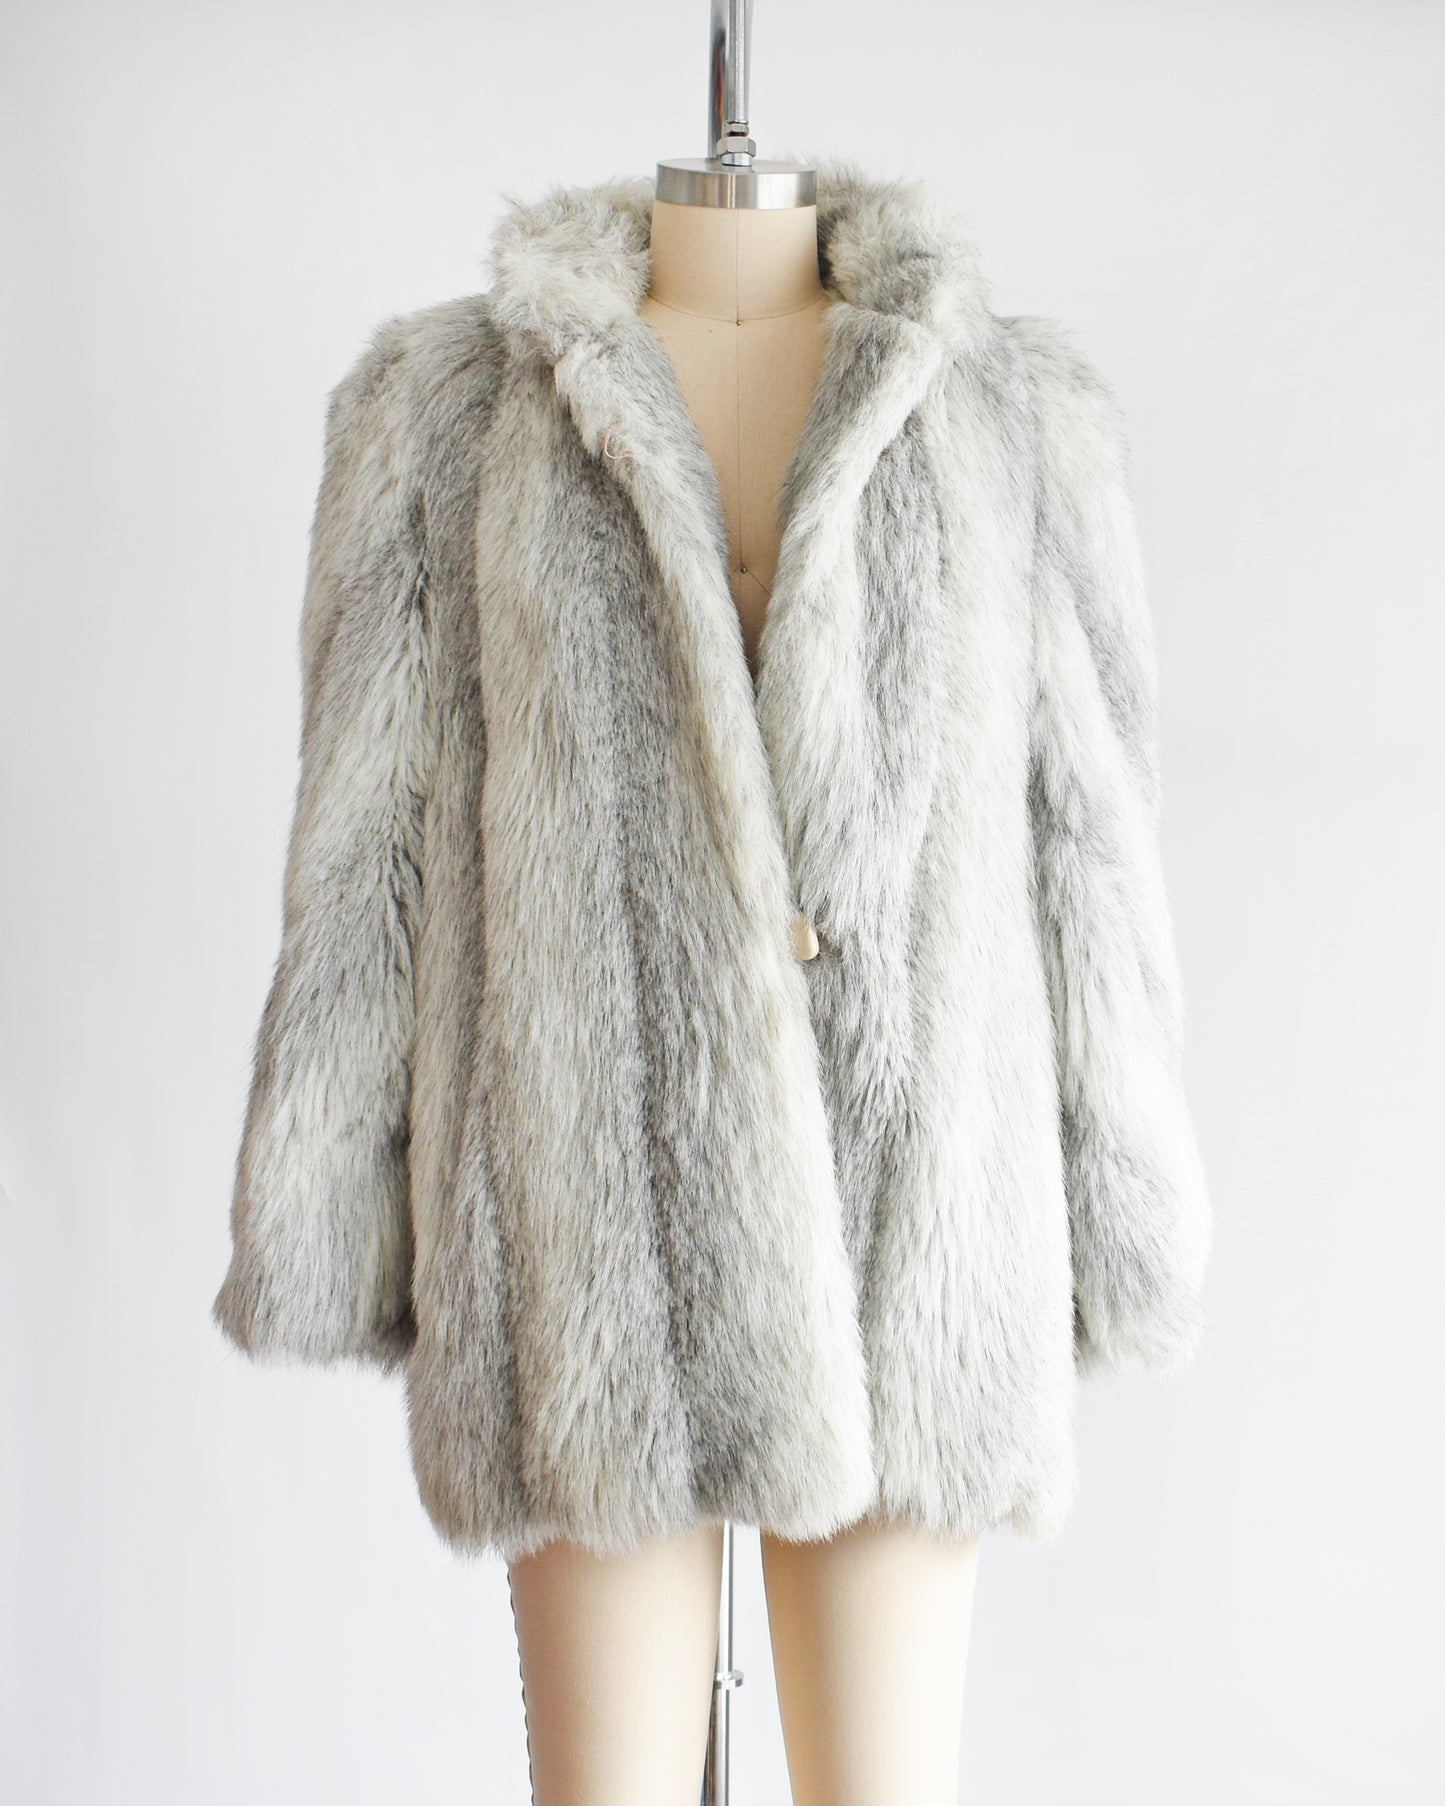 A vintage 1980s faux fur coat that features a plush white faux fur with light and dark gray stripes, a high collar, and structured puffed shoulders. The top button is unbuttoned.